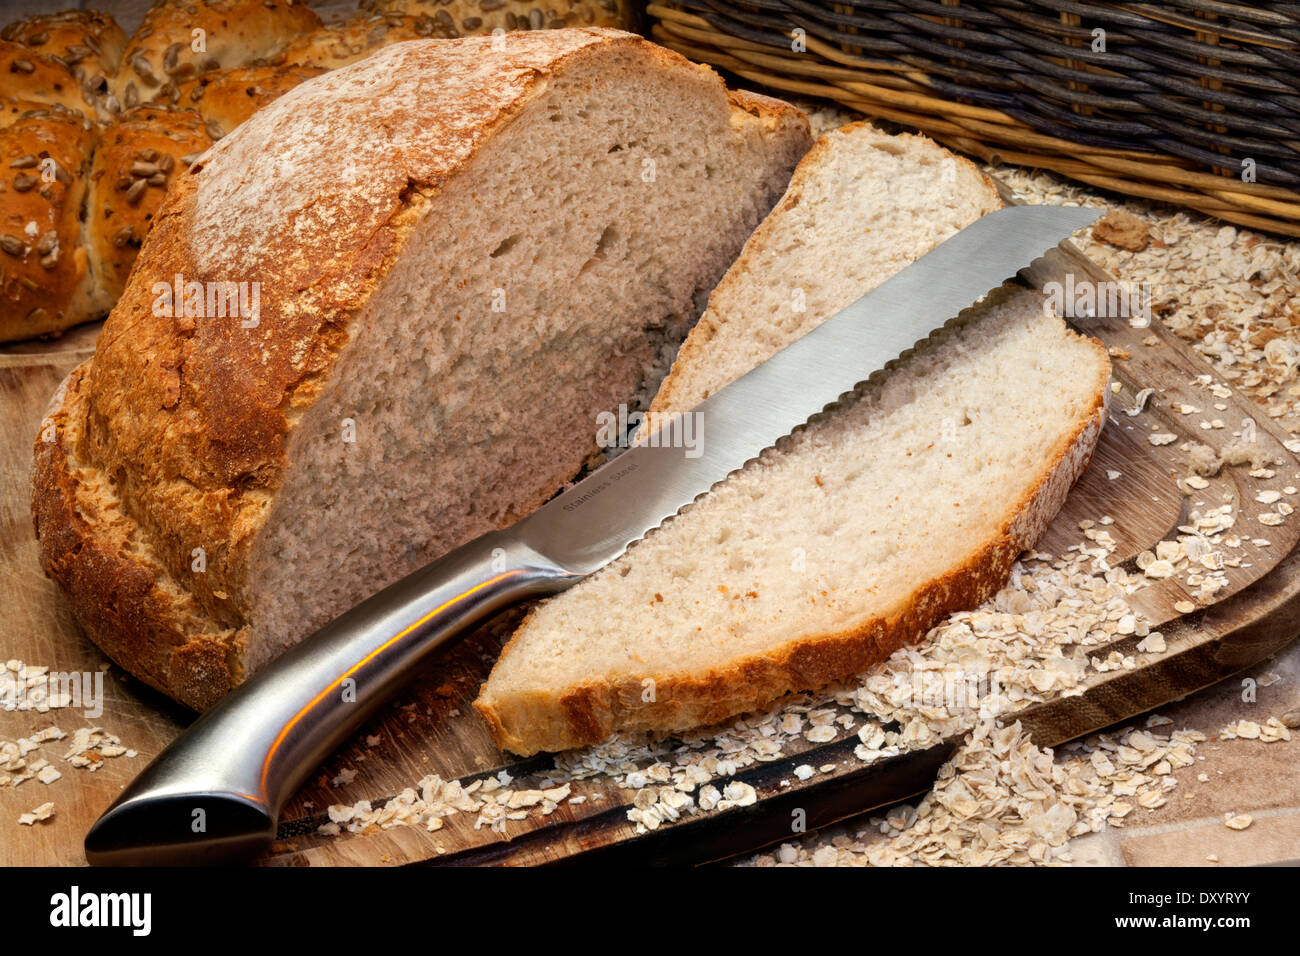 A freshly baked loaf of bread on a breadboard in farmhouse kitchen Stock Photo